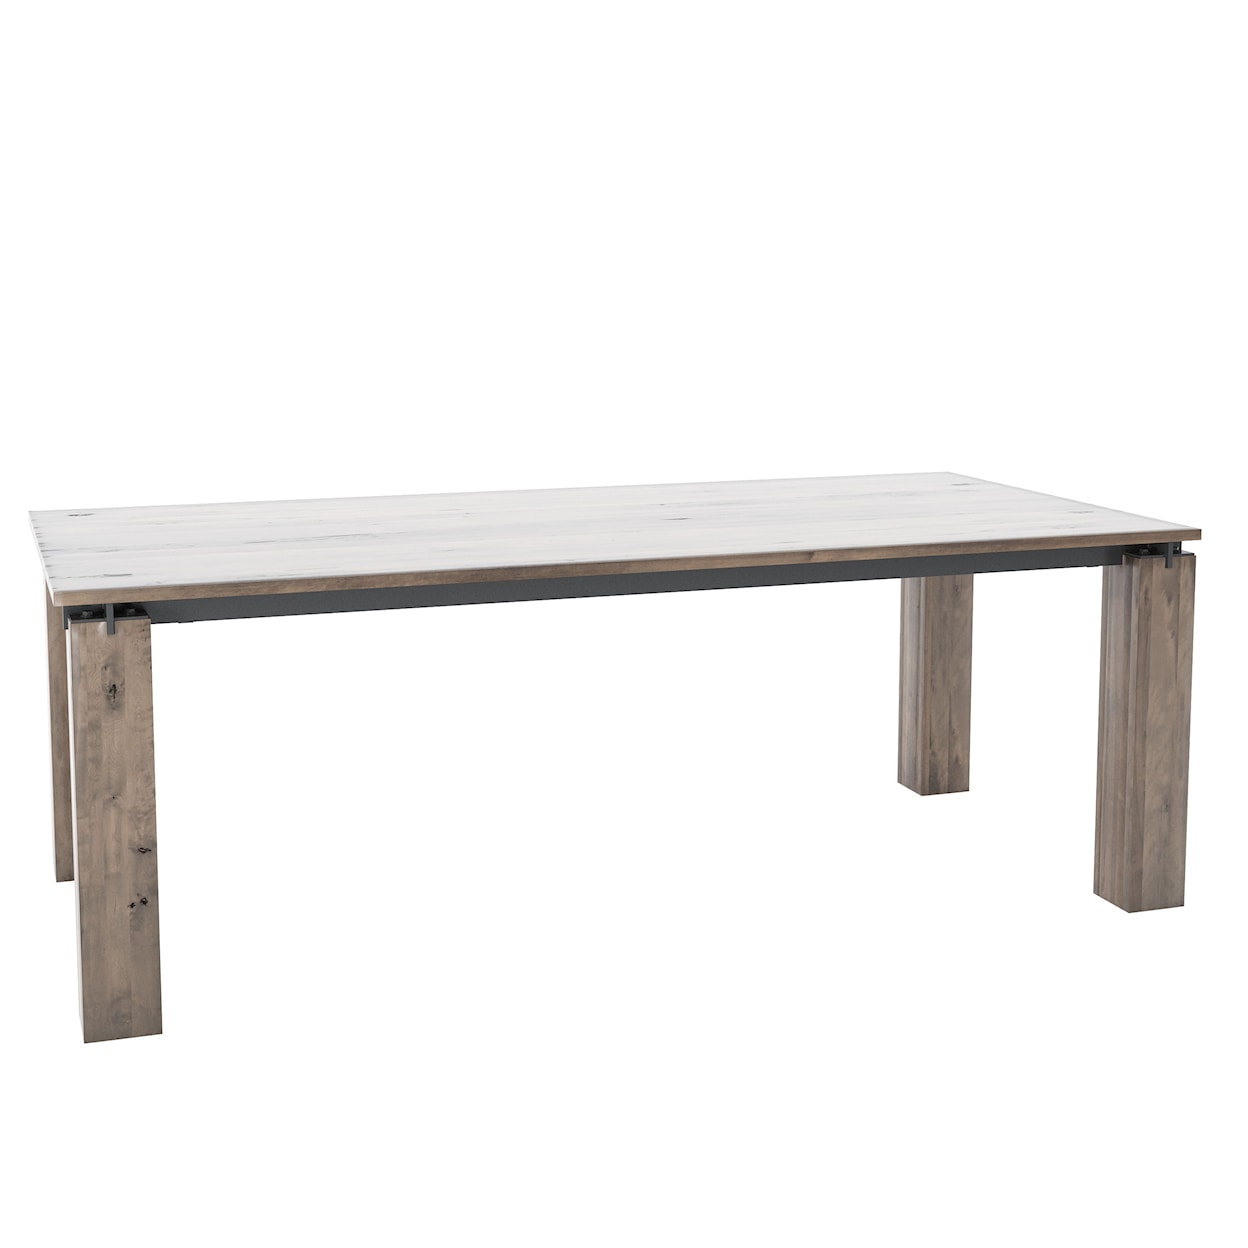 Canadel East Side Rectangular wood table